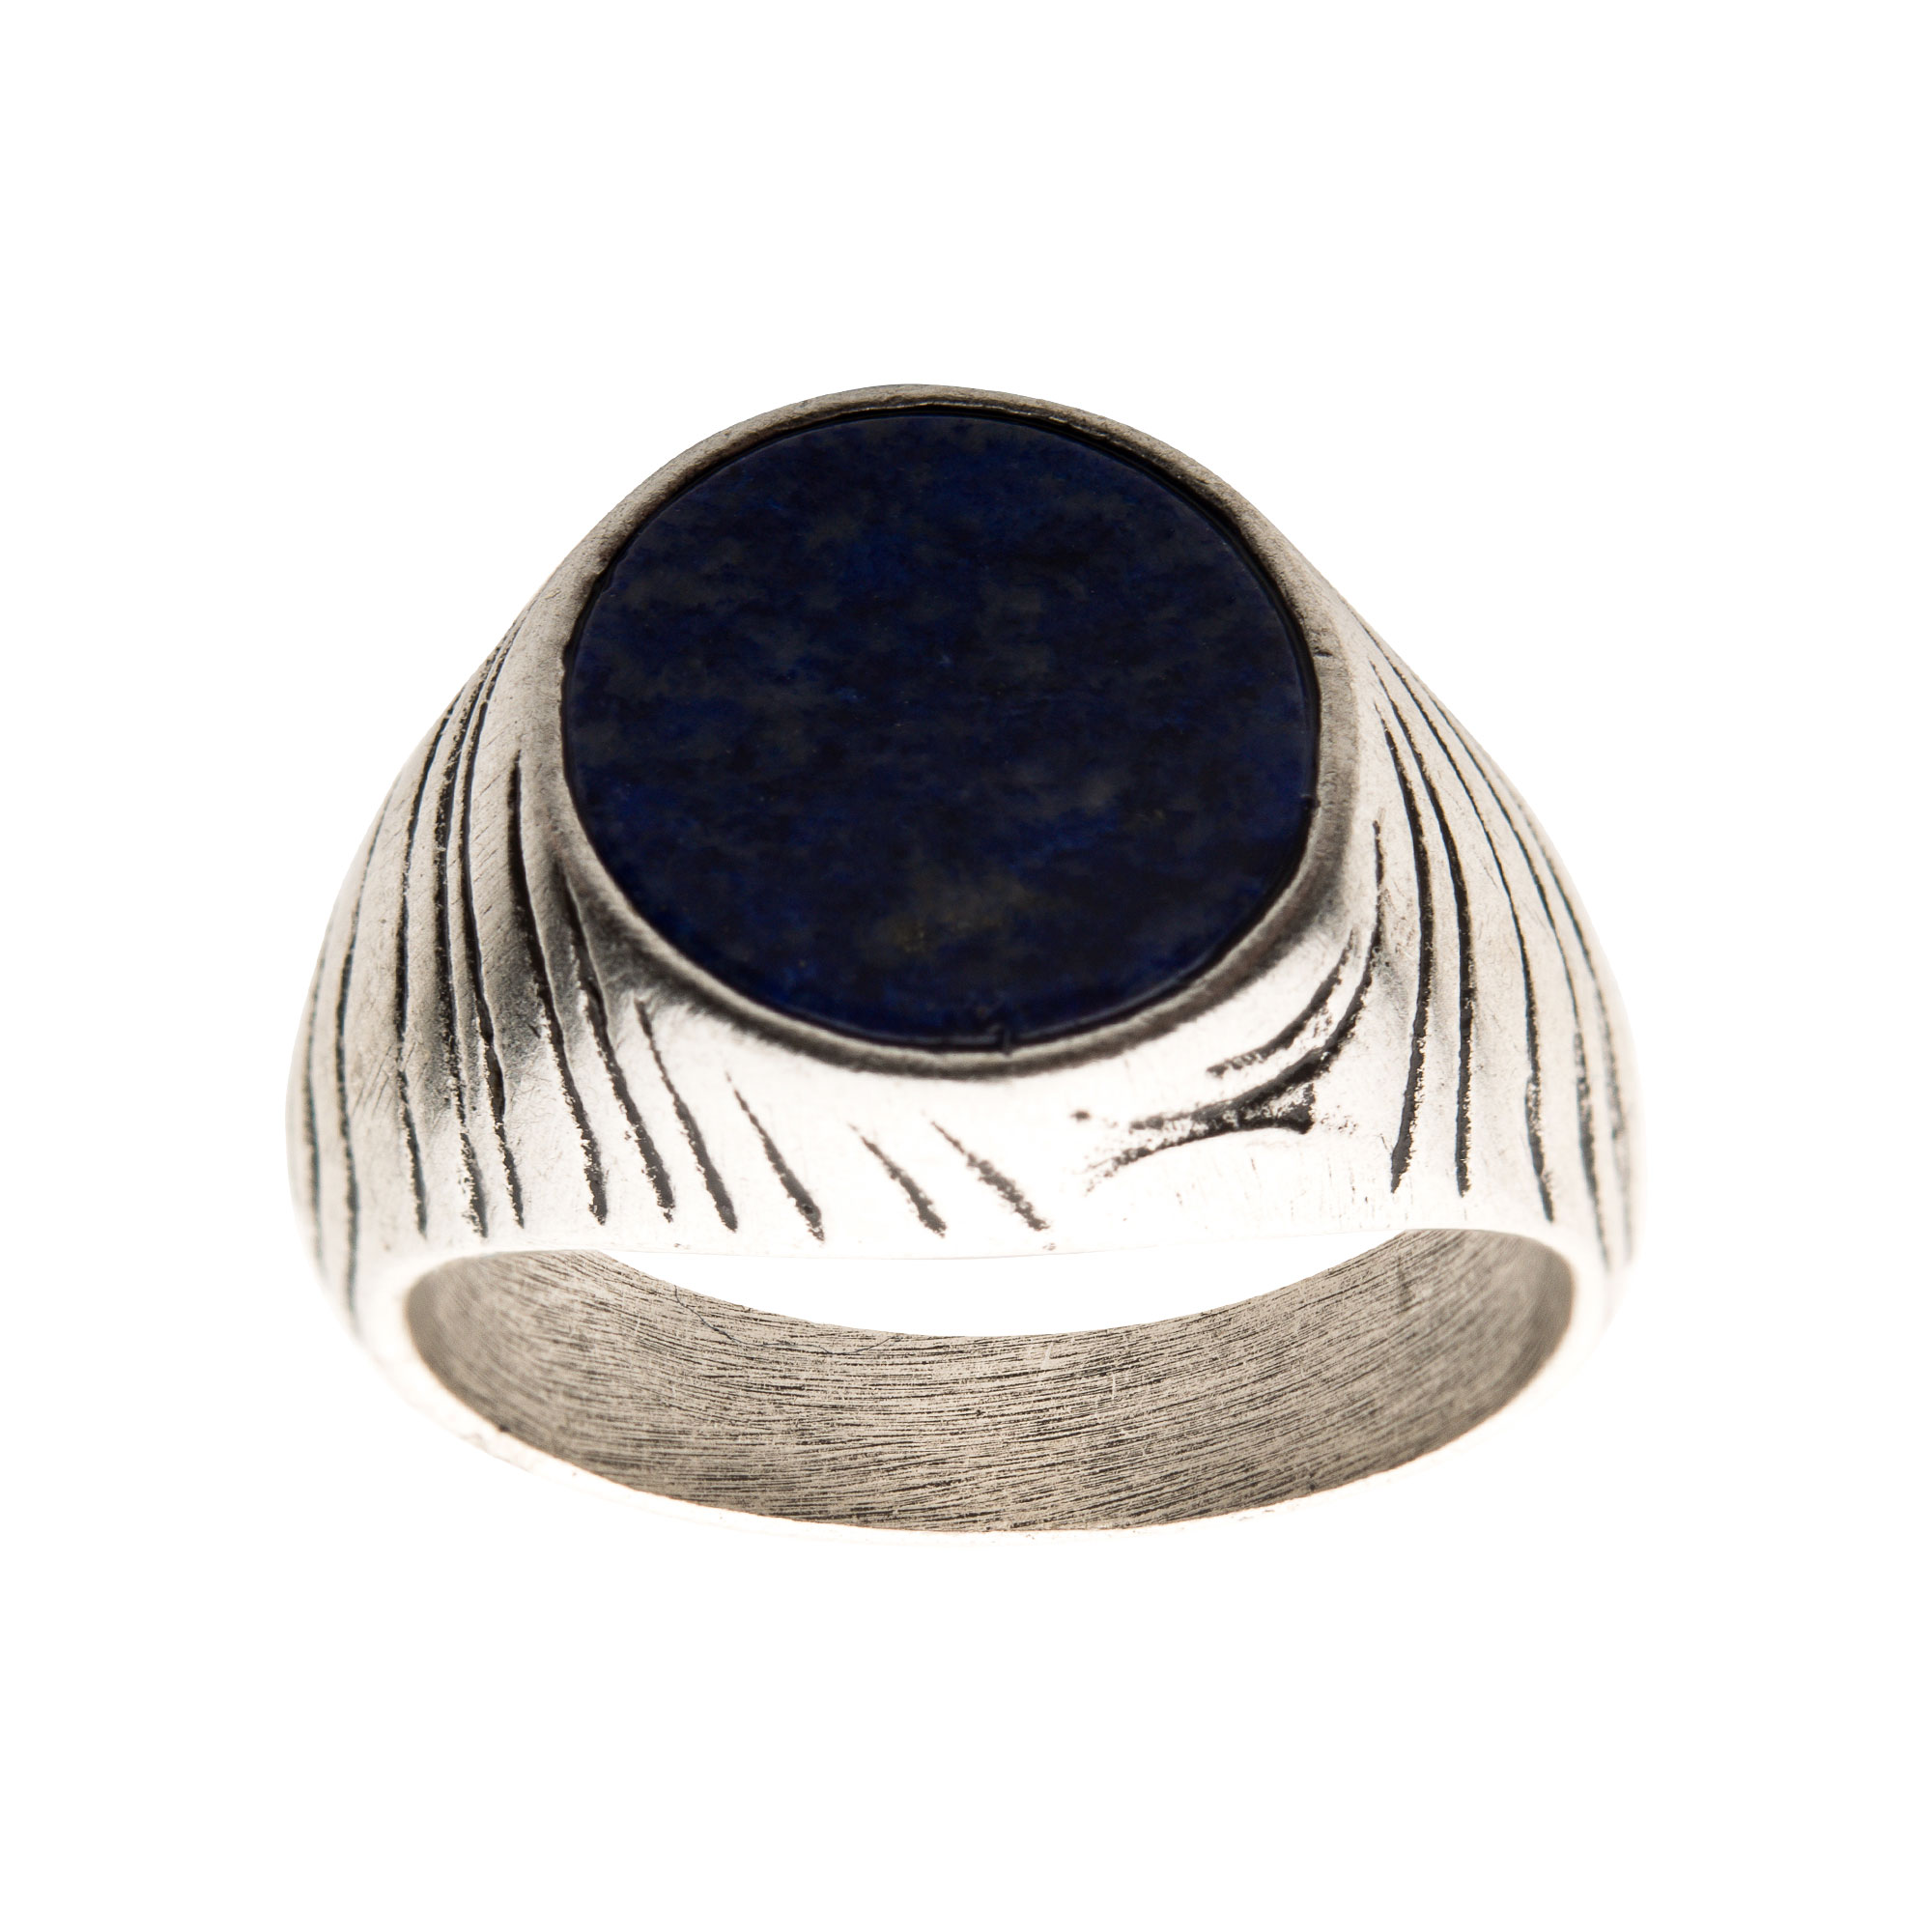 Stainless Steel Silver Plated with Lapis Stone Ring Image 2 Ritzi Jewelers Brookville, IN